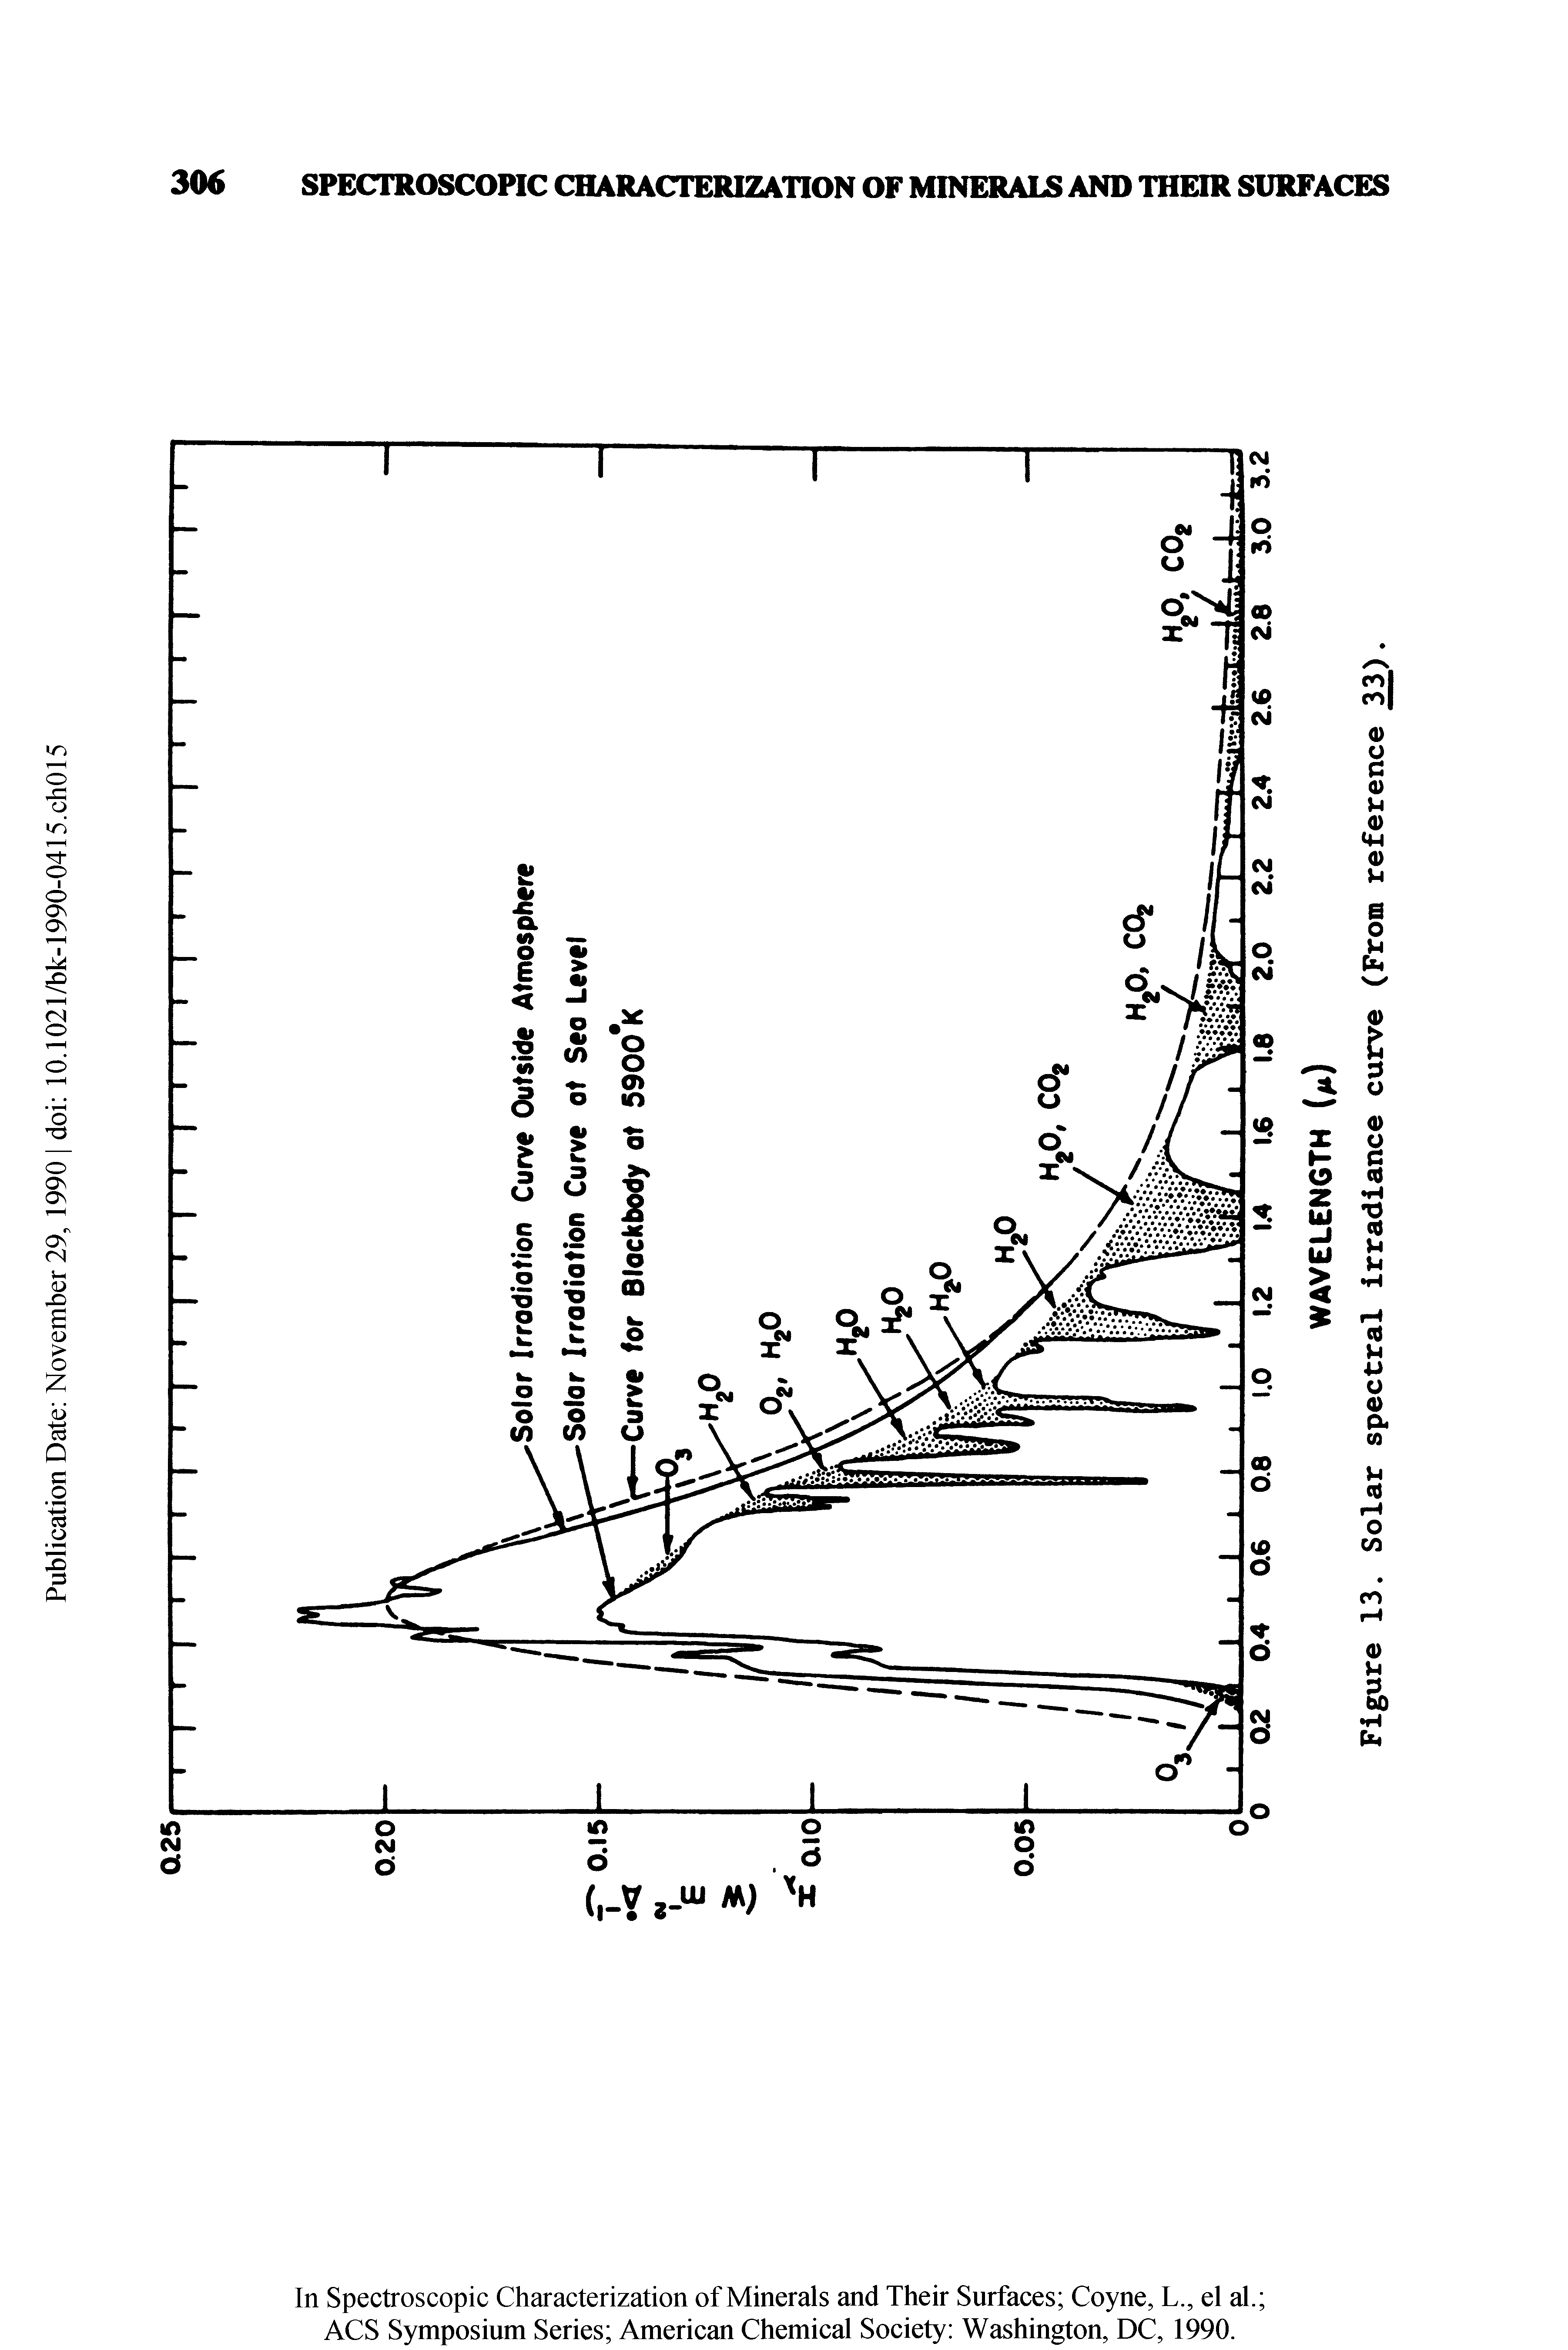 Figure 13. Solar spectral irradiance curve (From reference 33).